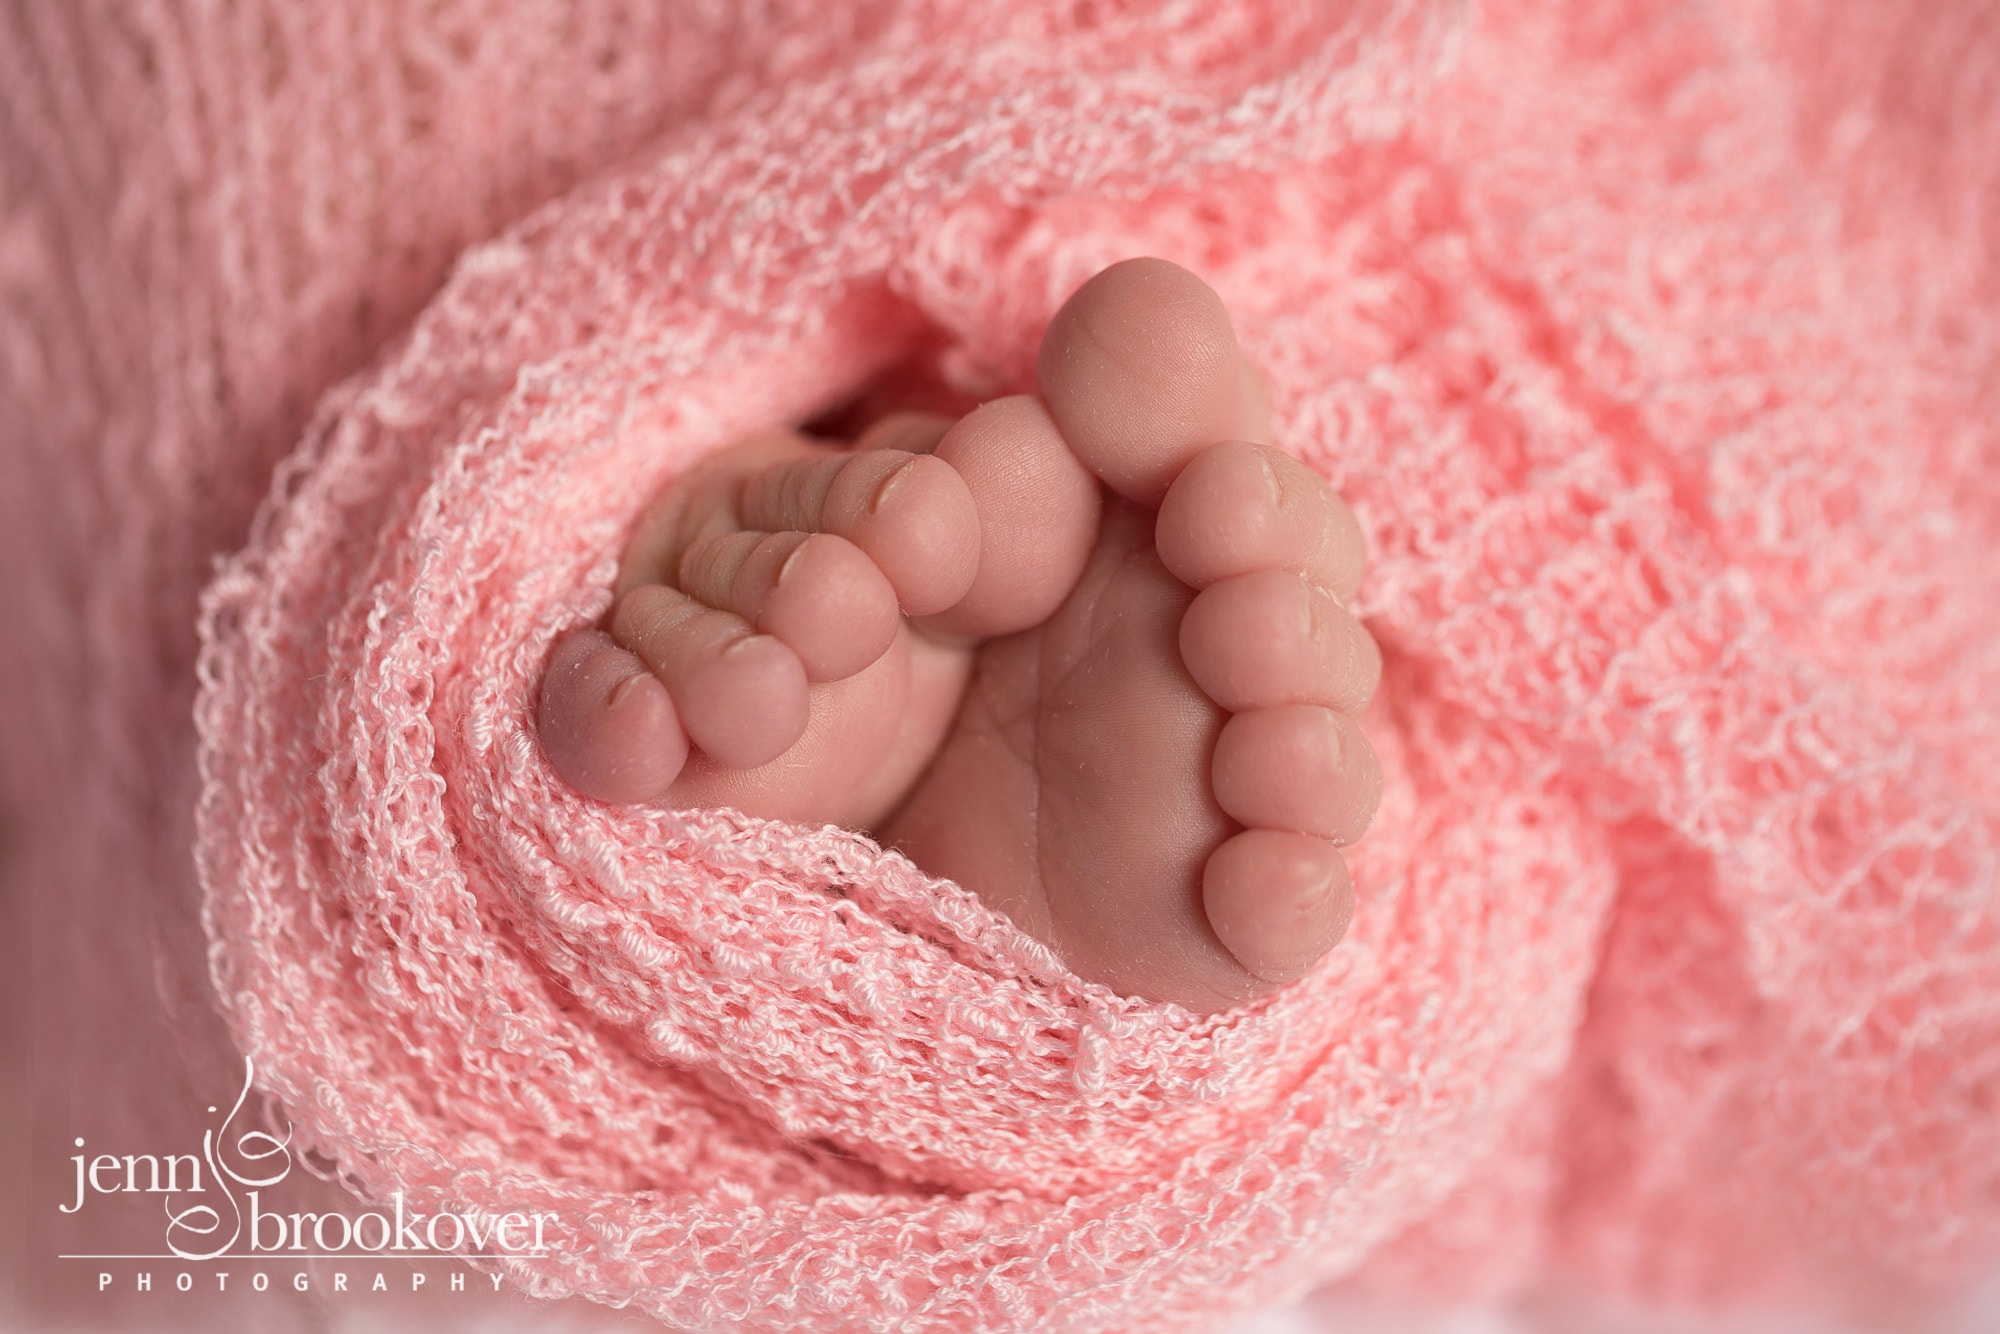 baby feet wrapped in pink close up by Jenn Brookover Photography taken during a newborn photo session in San Antonio